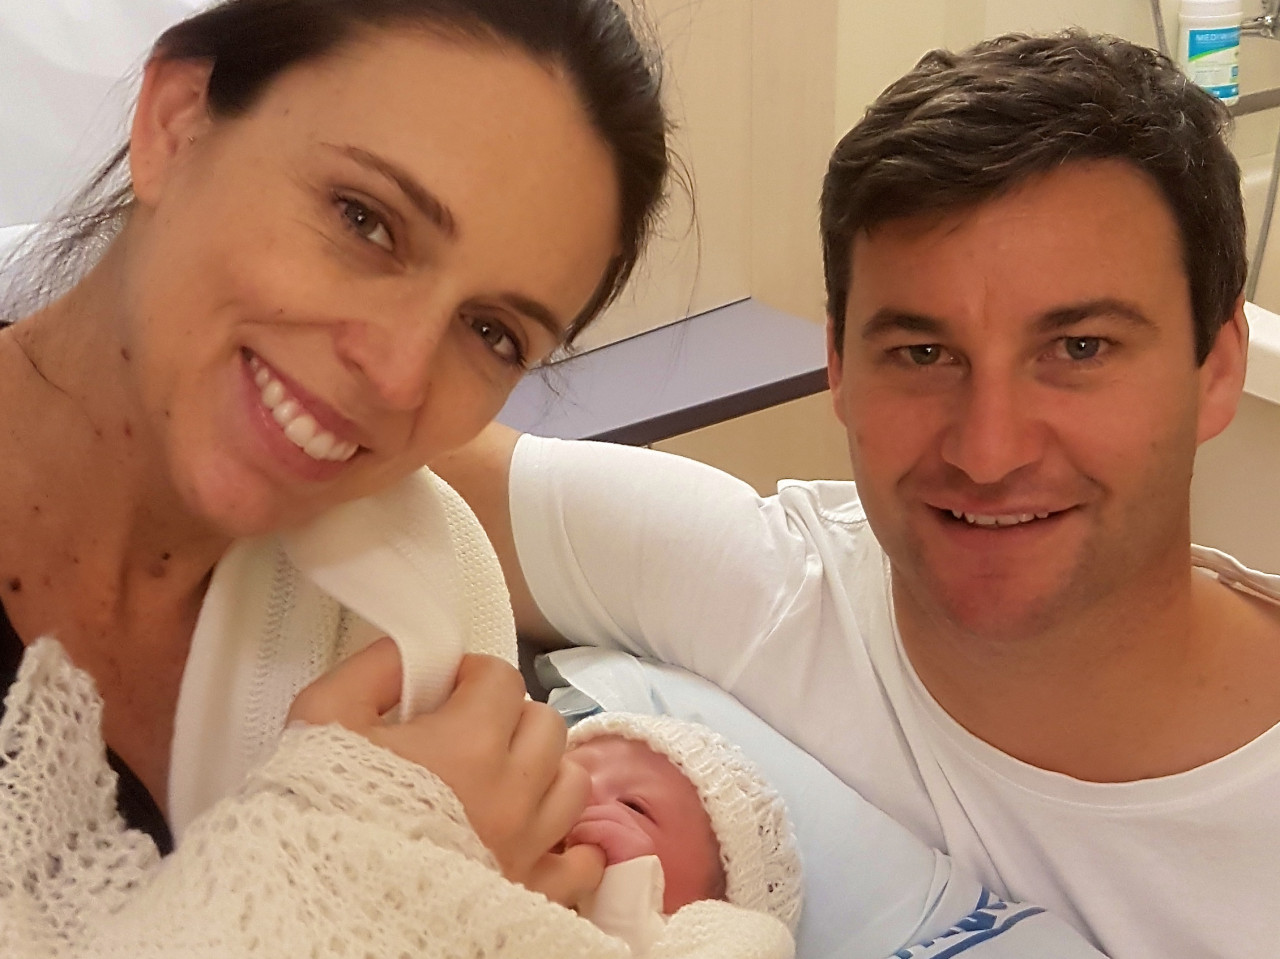 AUCKLAND, NEW ZEALAND - JUNE 21: In this handout image provided by Office of the Prime Minister of New Zealand, New Zealand Prime Minister Jacinda Ardern and partner Clarke Gayford pose for a photo with their new baby girl on June 21, 2018 in Auckland, New Zealand.  The baby was born at 4.45pm Tuesday June 21 2018 at Auckland Public Hospital. She weighs 3.31 kgs. The child is the first for Jacinda Ardern and her partner Clarke Gayford. (Photo by Office of the Prime Minister of New Zealand via Getty Images)